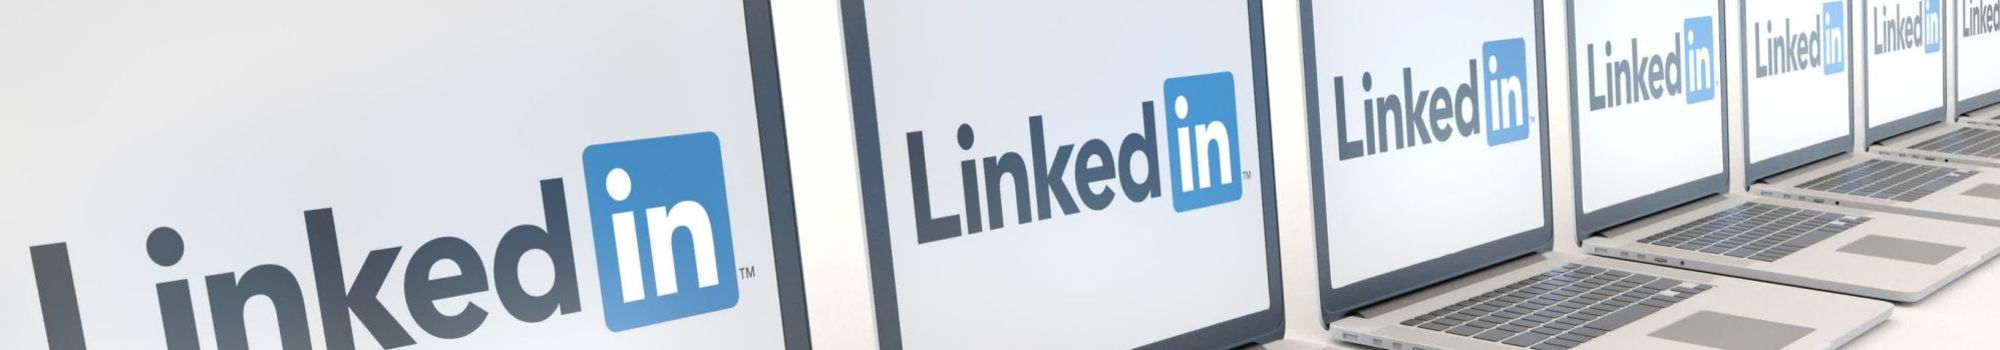 Linked In Tips Banner